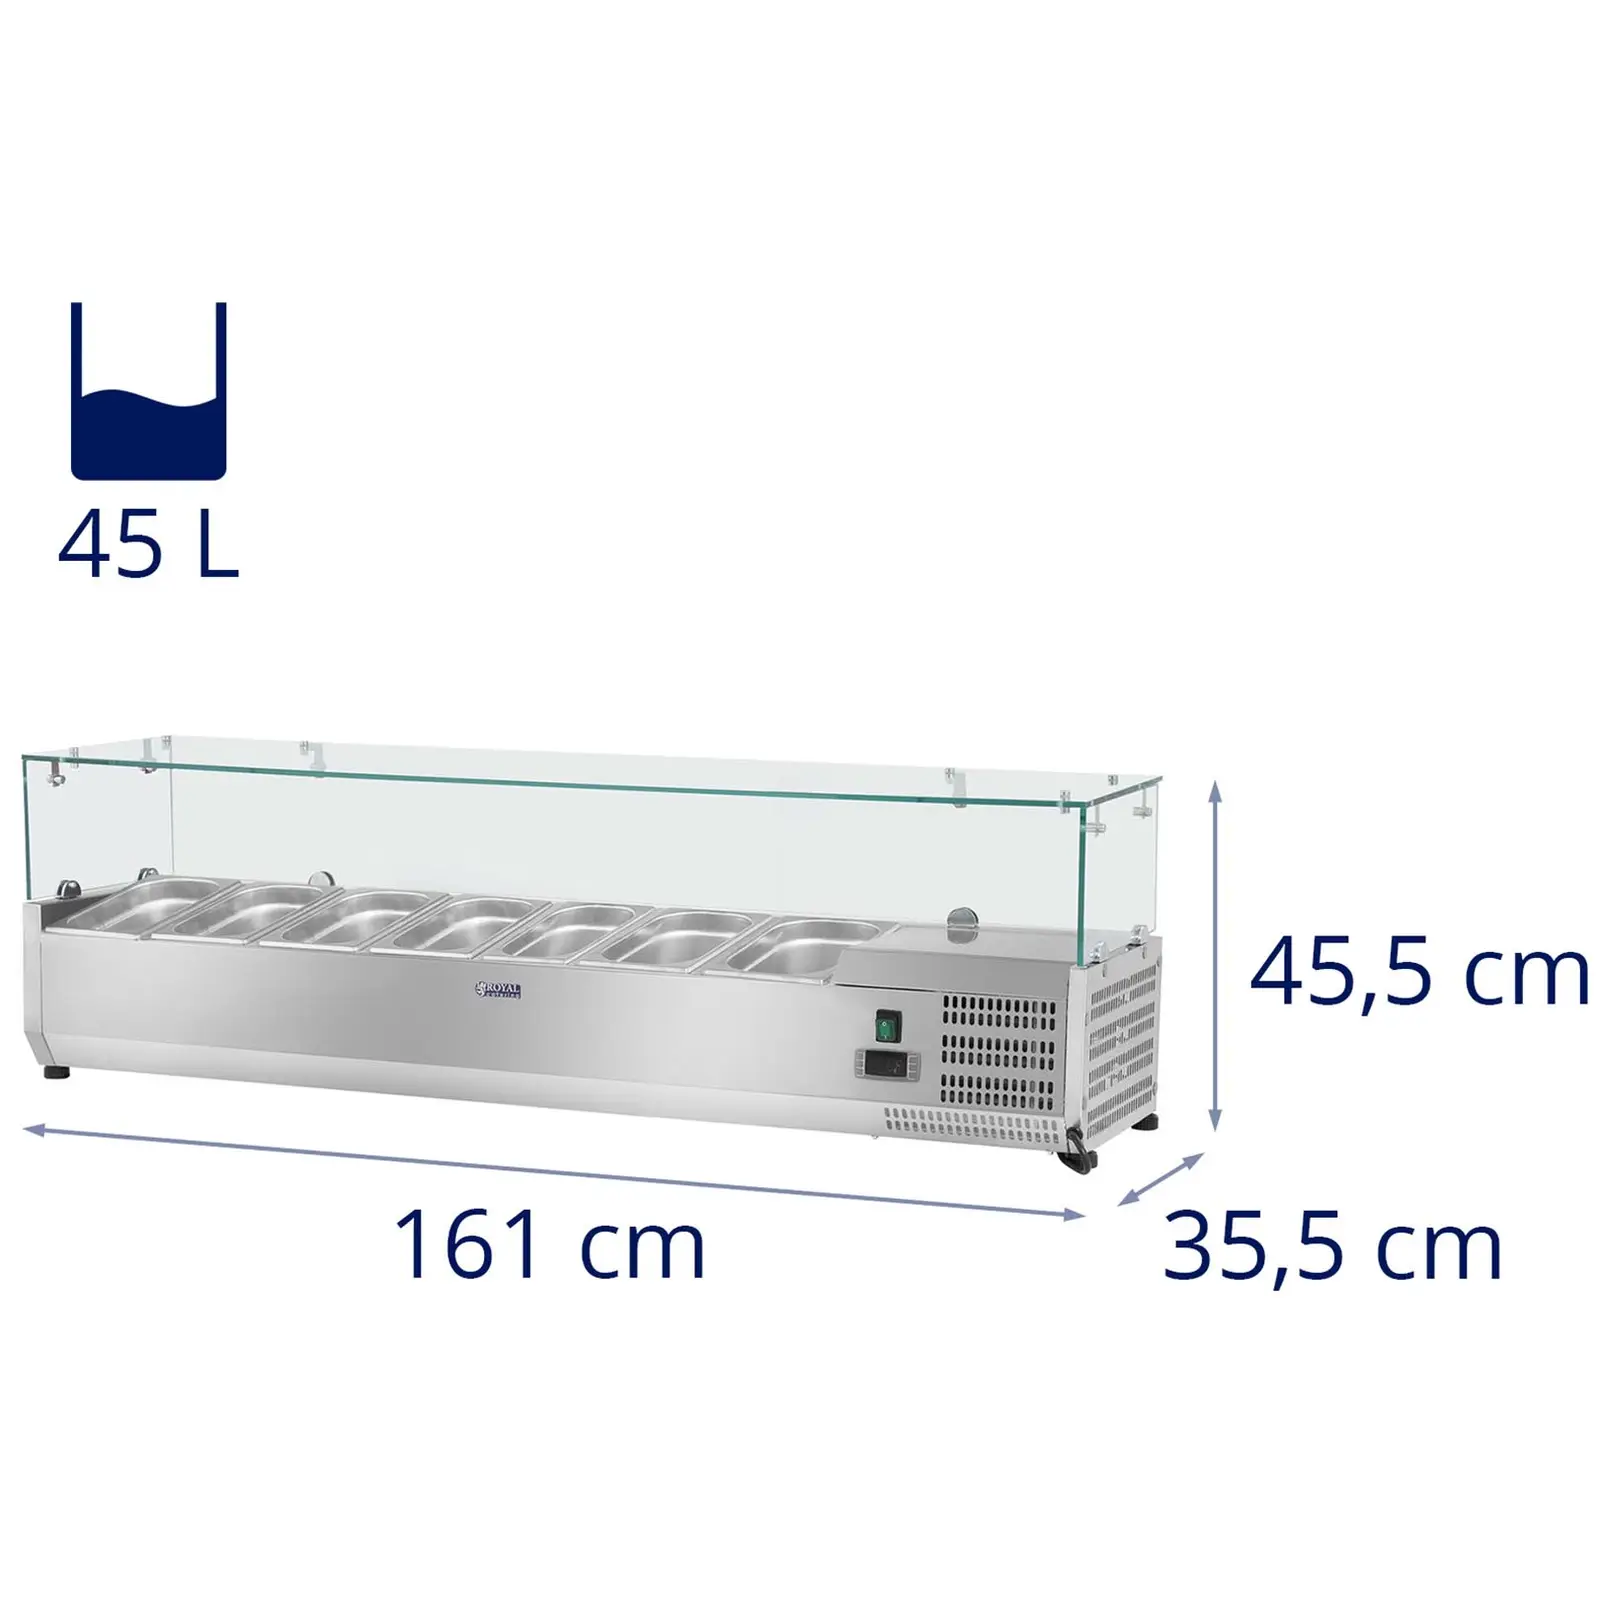 Countertop Refrigerated Display Case - 160 x 33 cm - Glass Cover